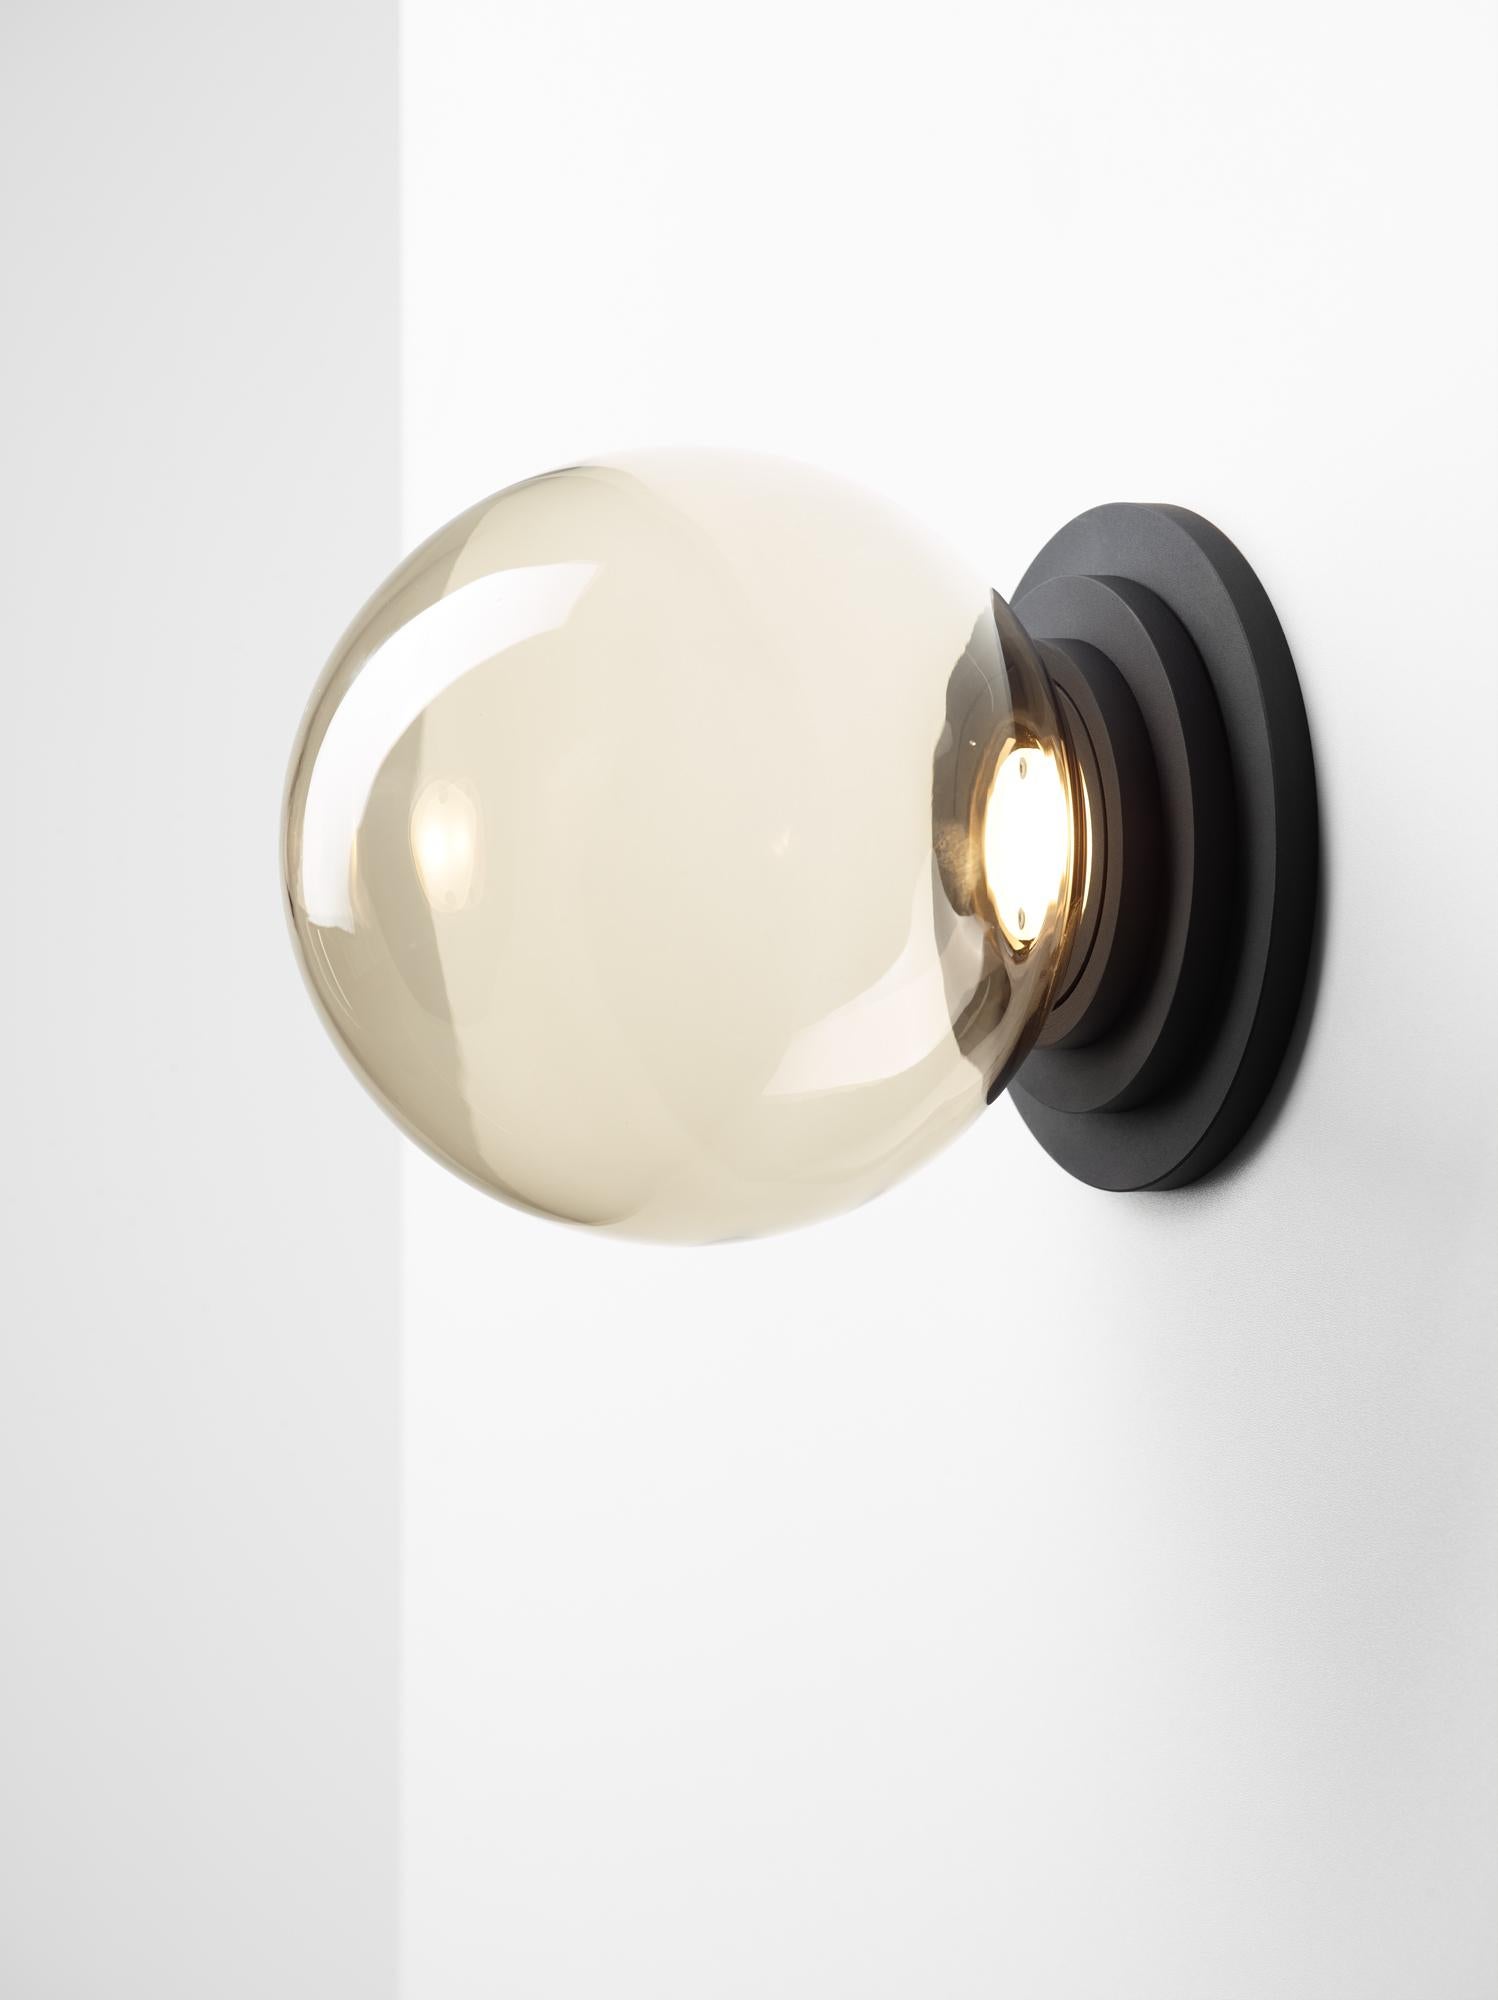 Black Stratos Ball Wall Light by Dechem Studio
Dimensions: D 18 x H 20 cm
Materials: Aluminum, Glass.
Also Available: Different colours available.

Different shapes of capsules and spheres contrast with anodized alloy fixtures, creating a surprising